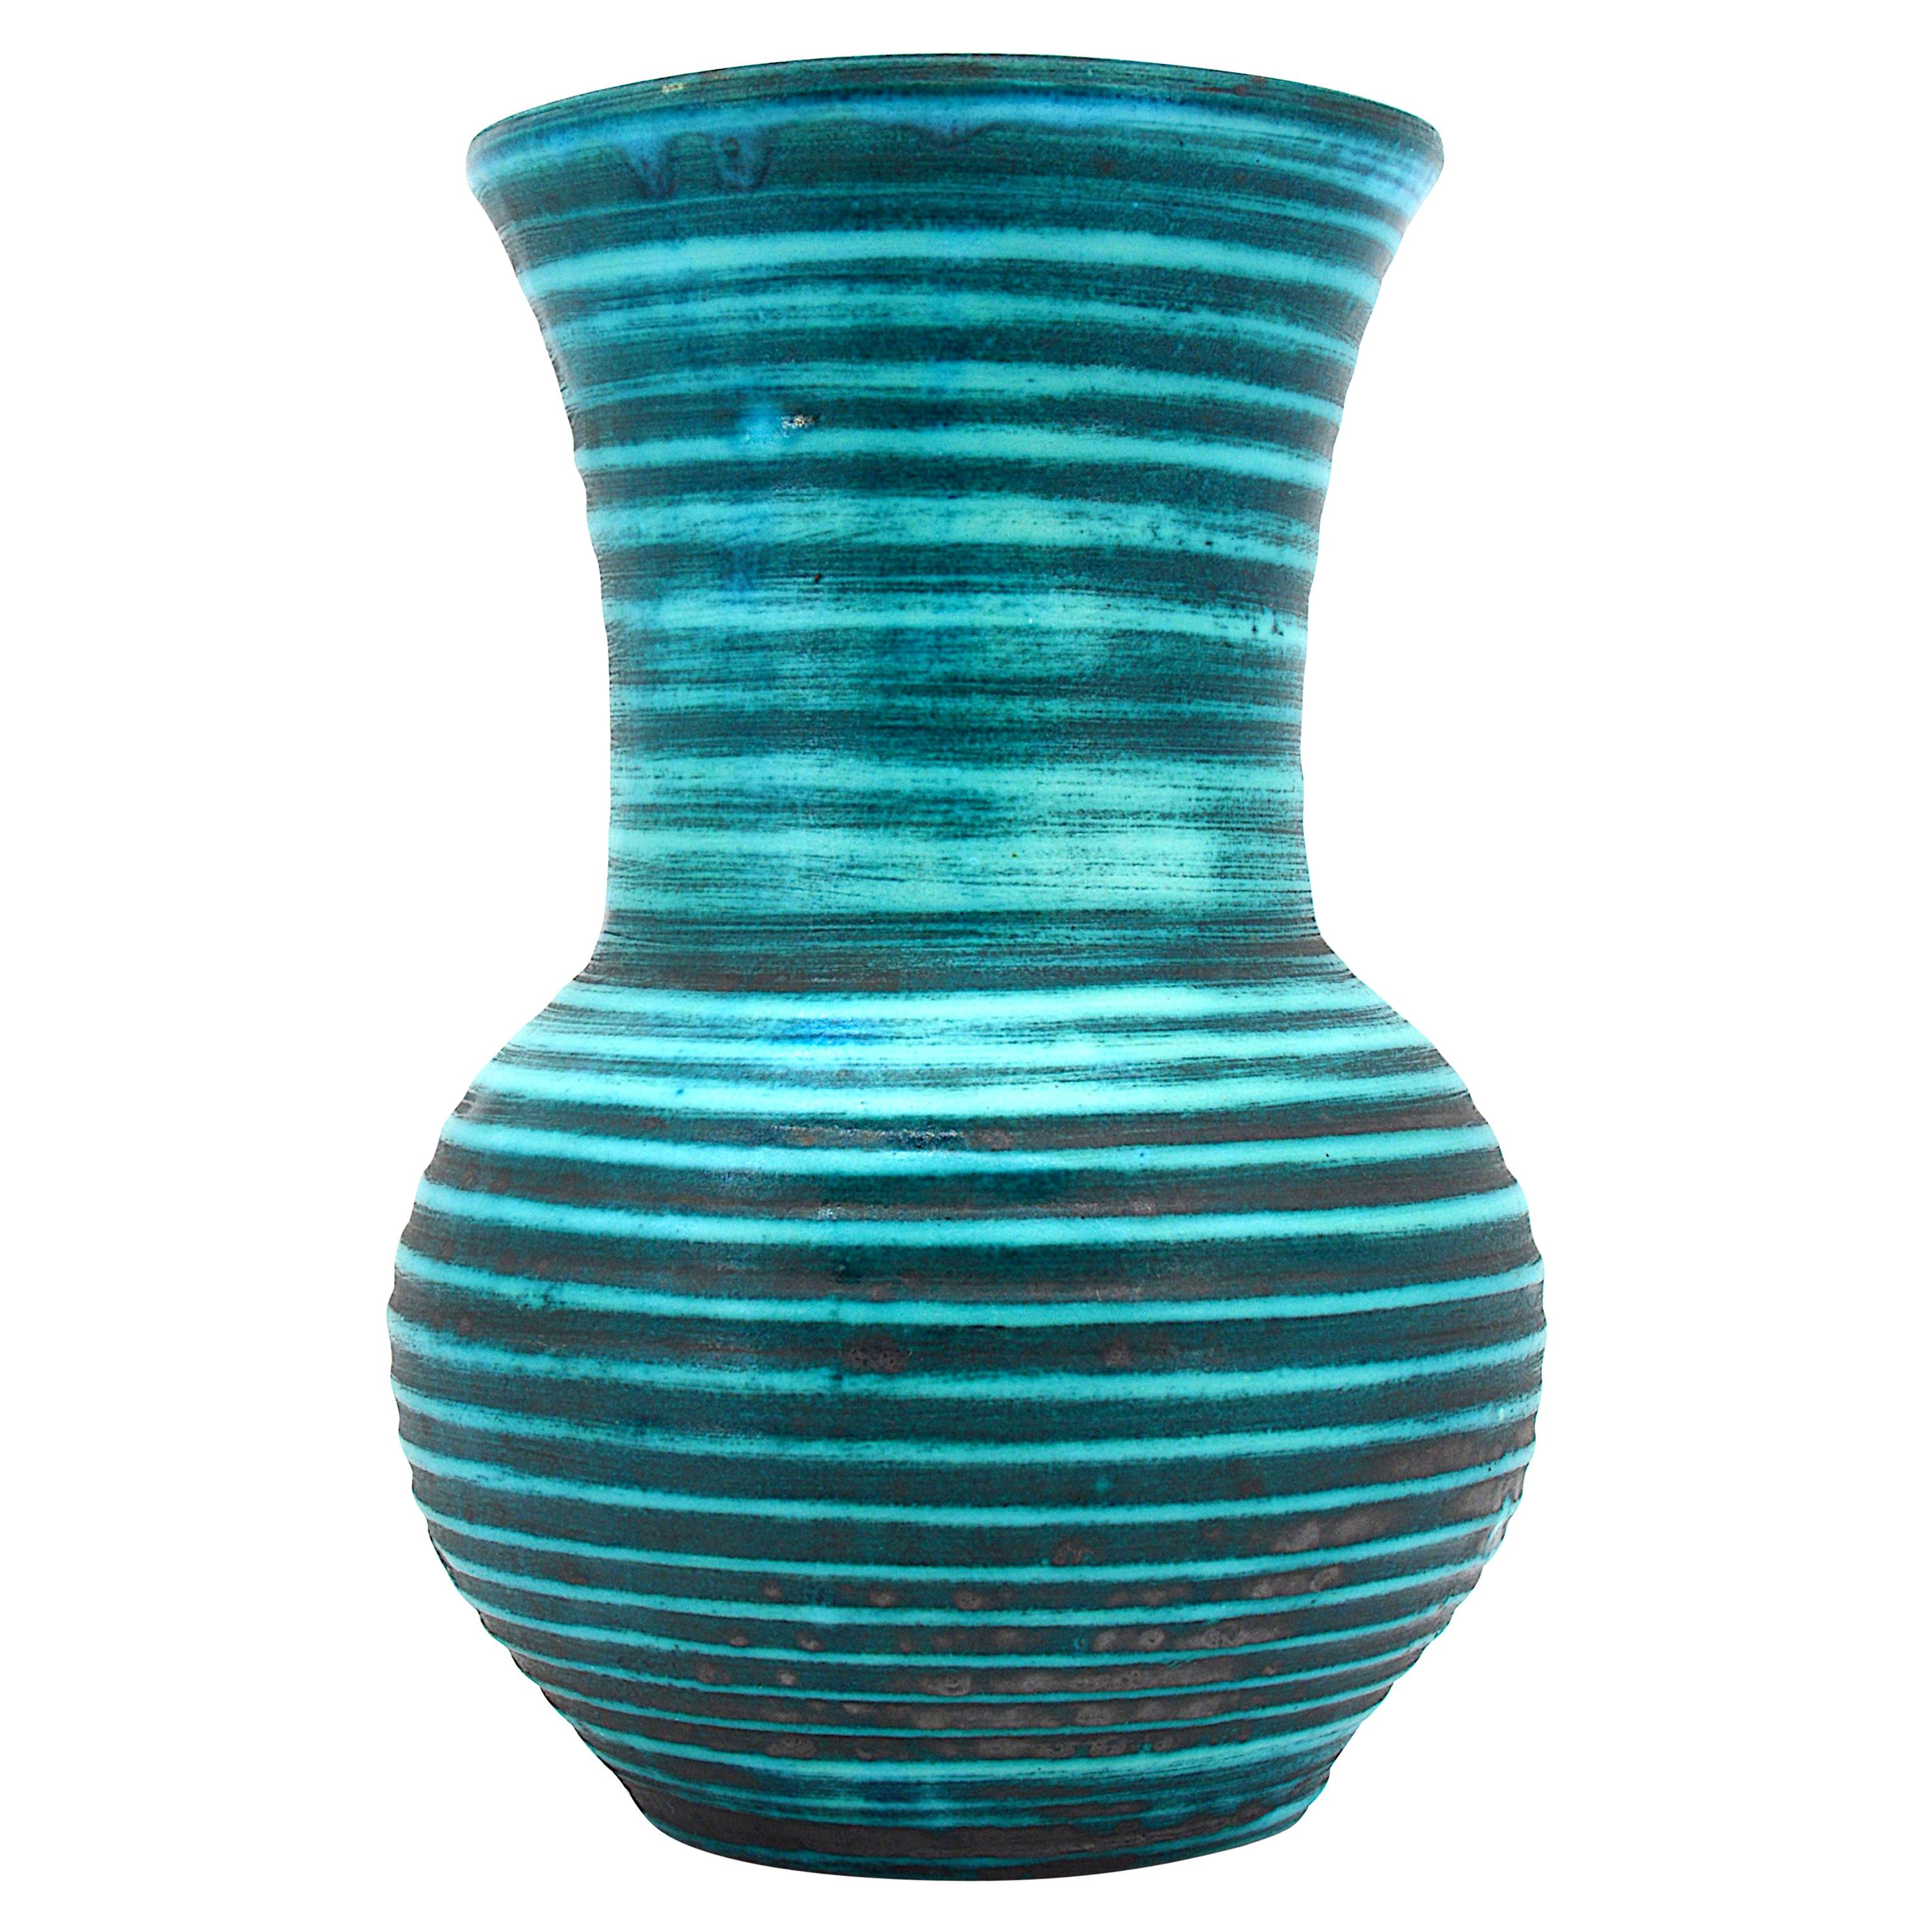 Accolay Turquoise Blue and Anthracite Gray Concentric Circle Vase, 1950s